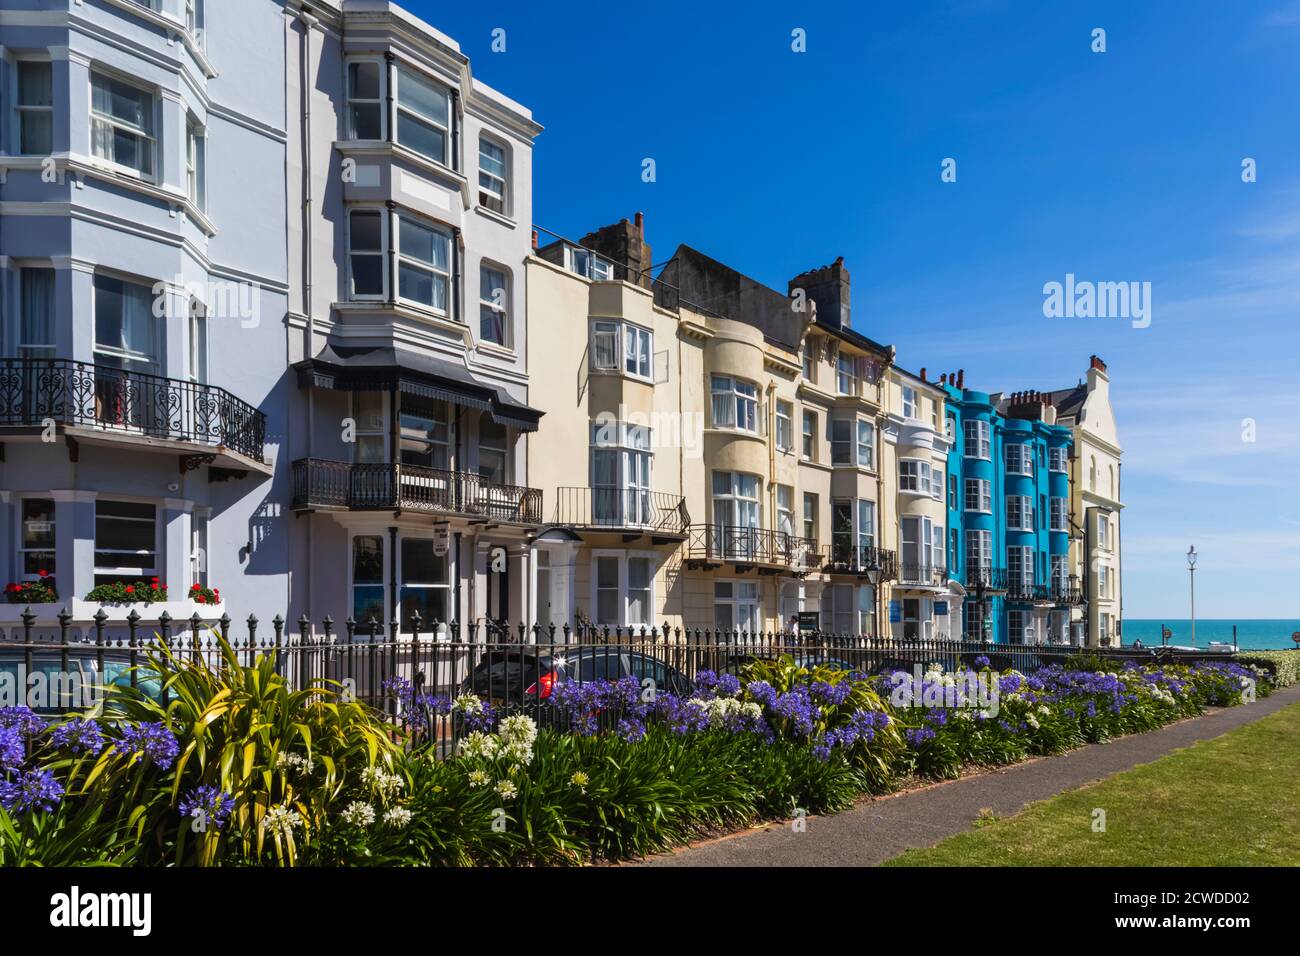 England, East Sussex, Brighton, Kemptown, The New Steine Gardens and Colourful Hotels and Residential Buildings Stock Photo